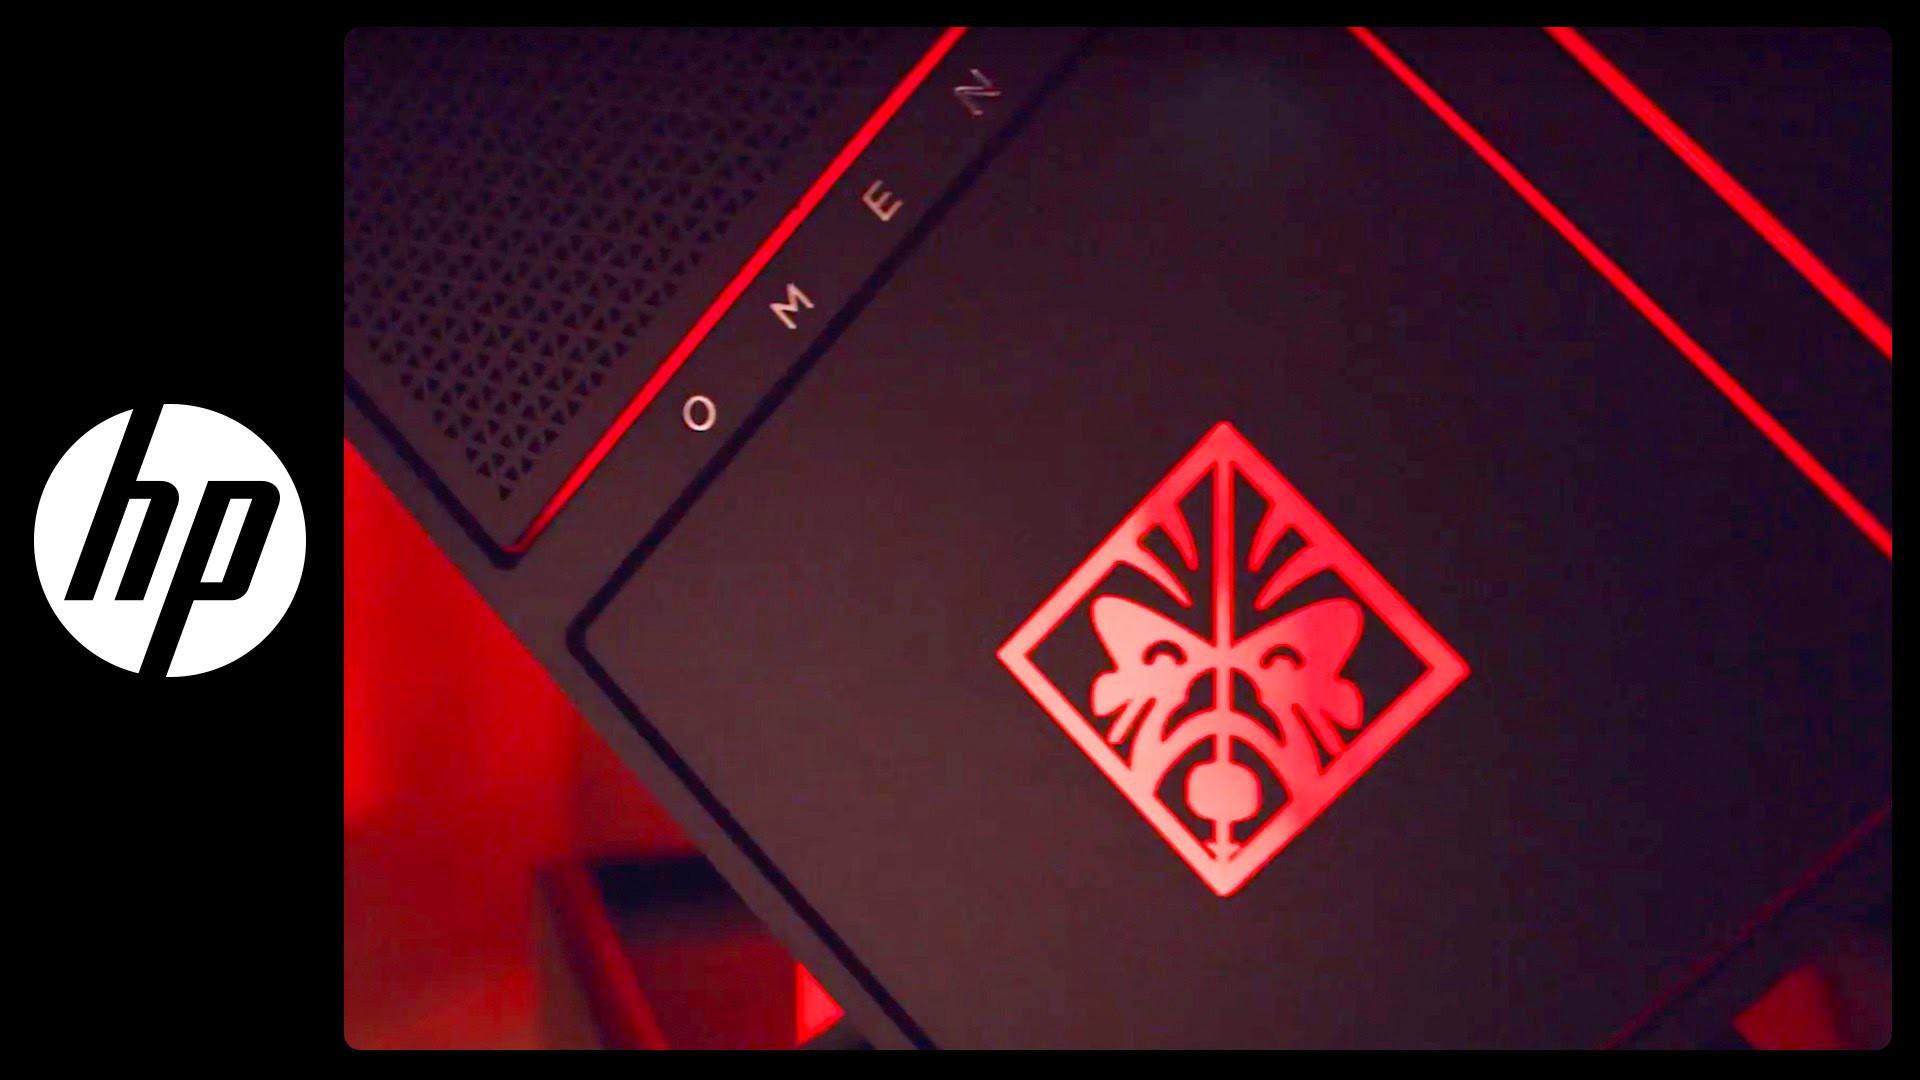 Unleashes your gaming skills with the HP OMEN X line up